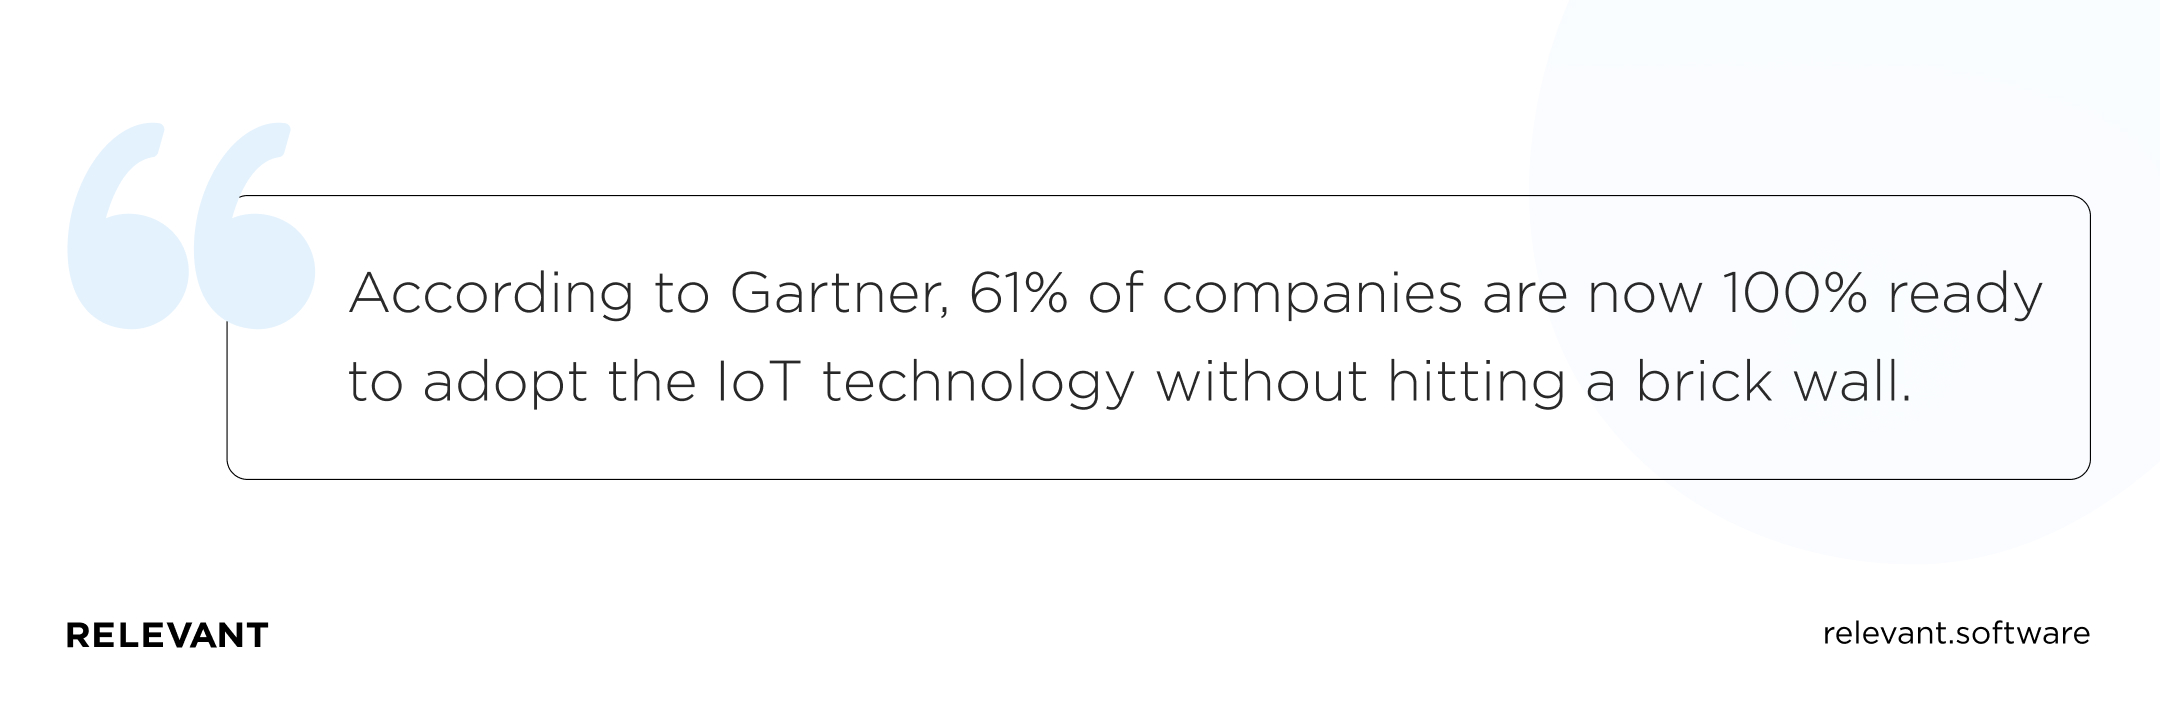 According to Gartner, 61% of companies are now 100% ready to adopt the IoT technology without hitting a brick wall.